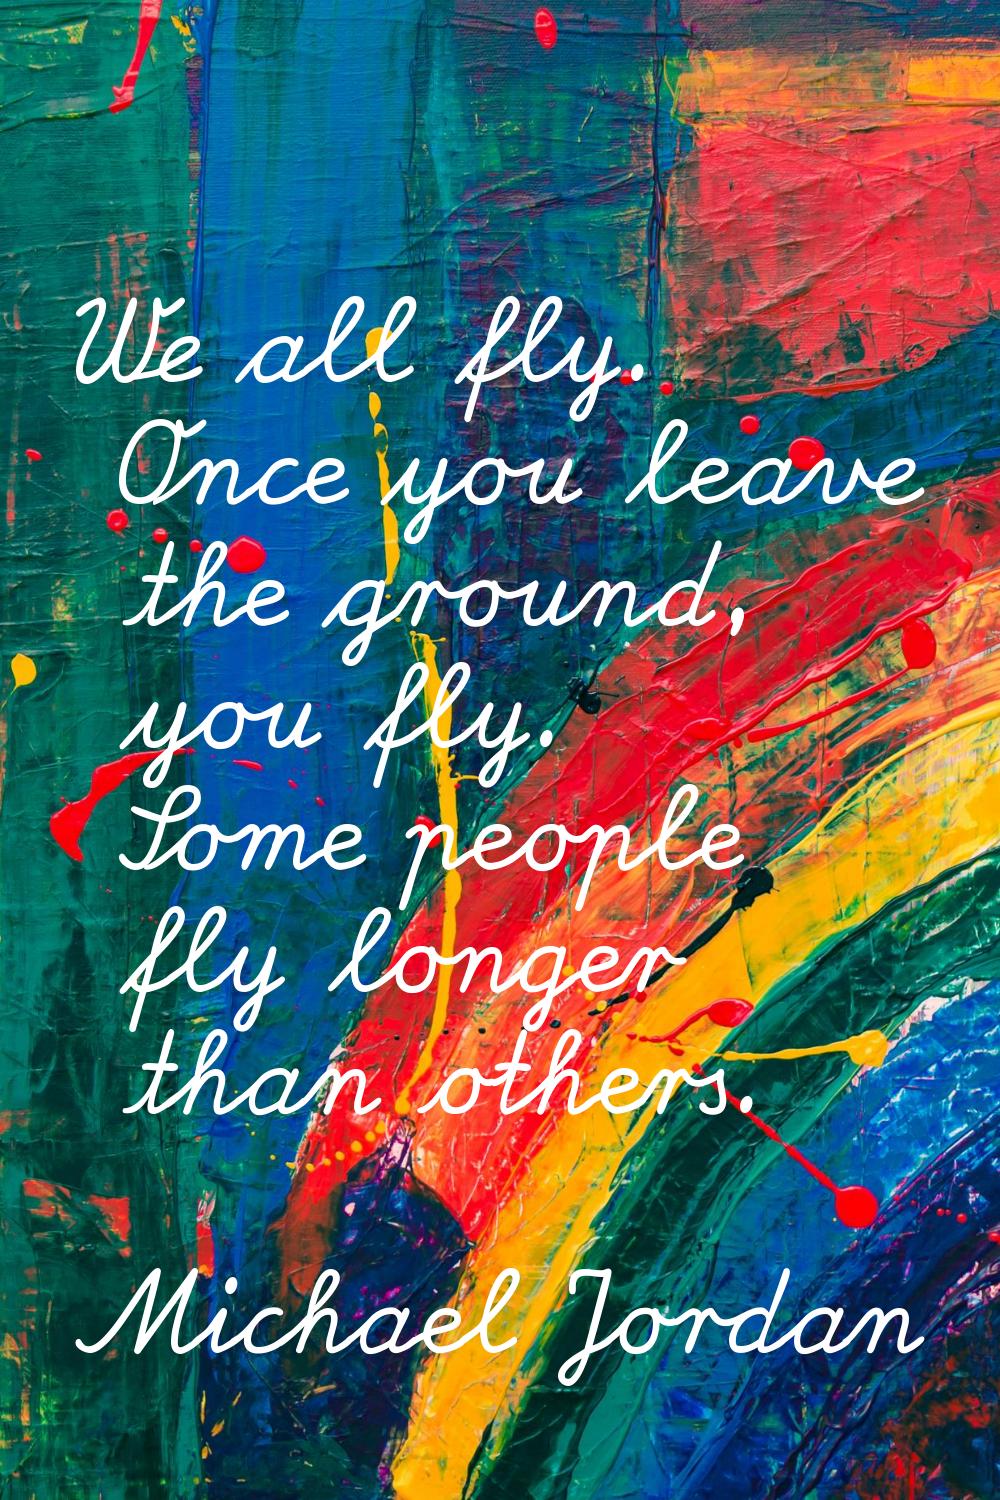 We all fly. Once you leave the ground, you fly. Some people fly longer than others.